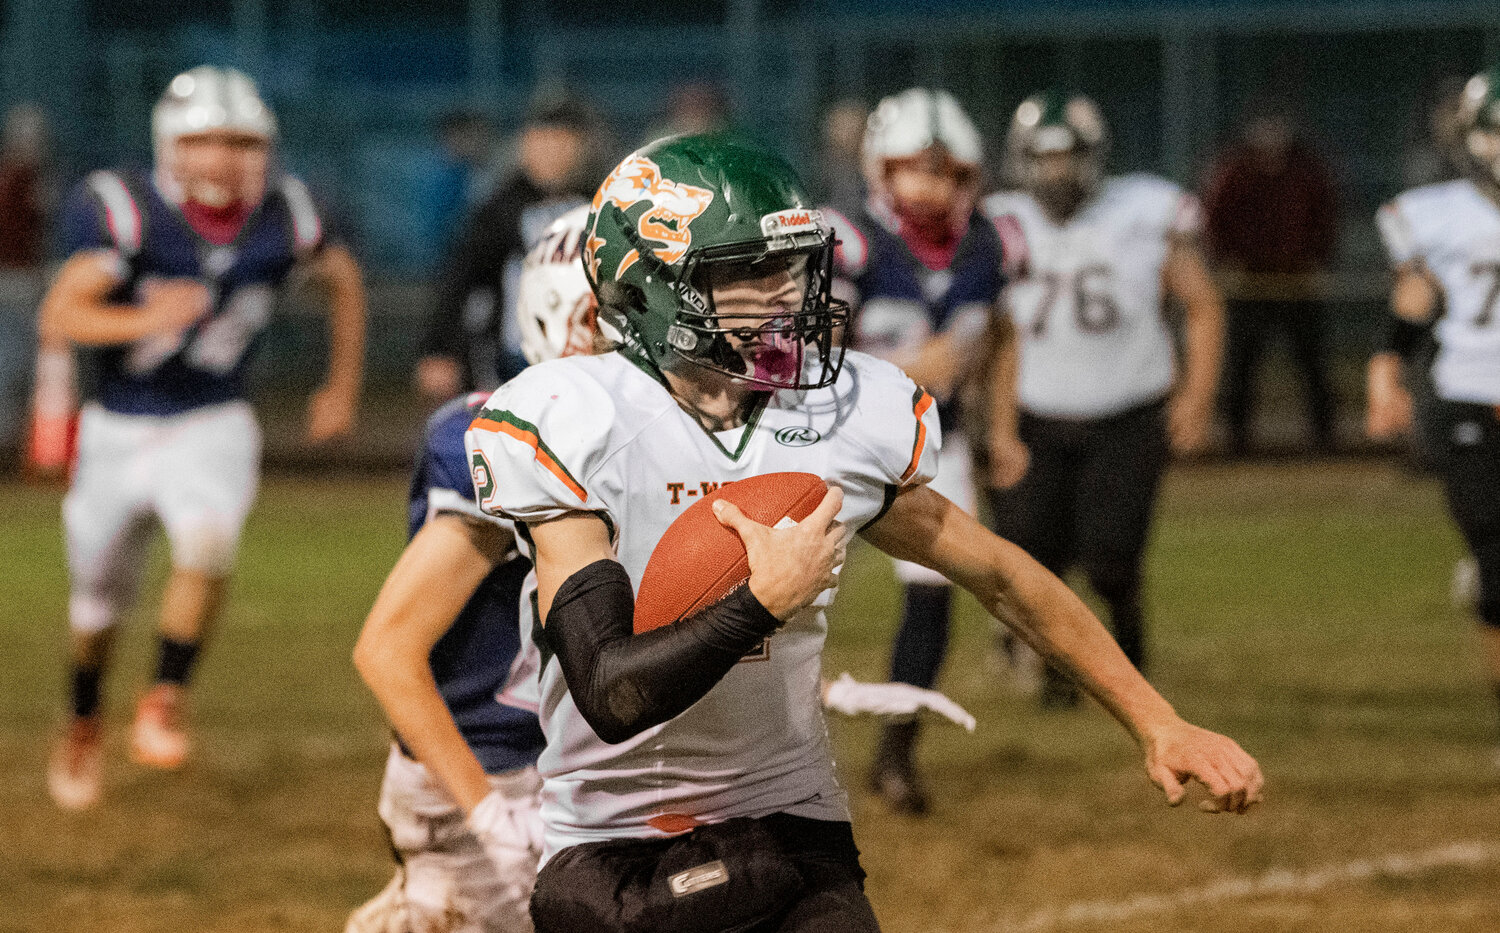 Morton-White Pass quarterback Judah Kelly takes the ball down the field in Pe Ell on Friday night.